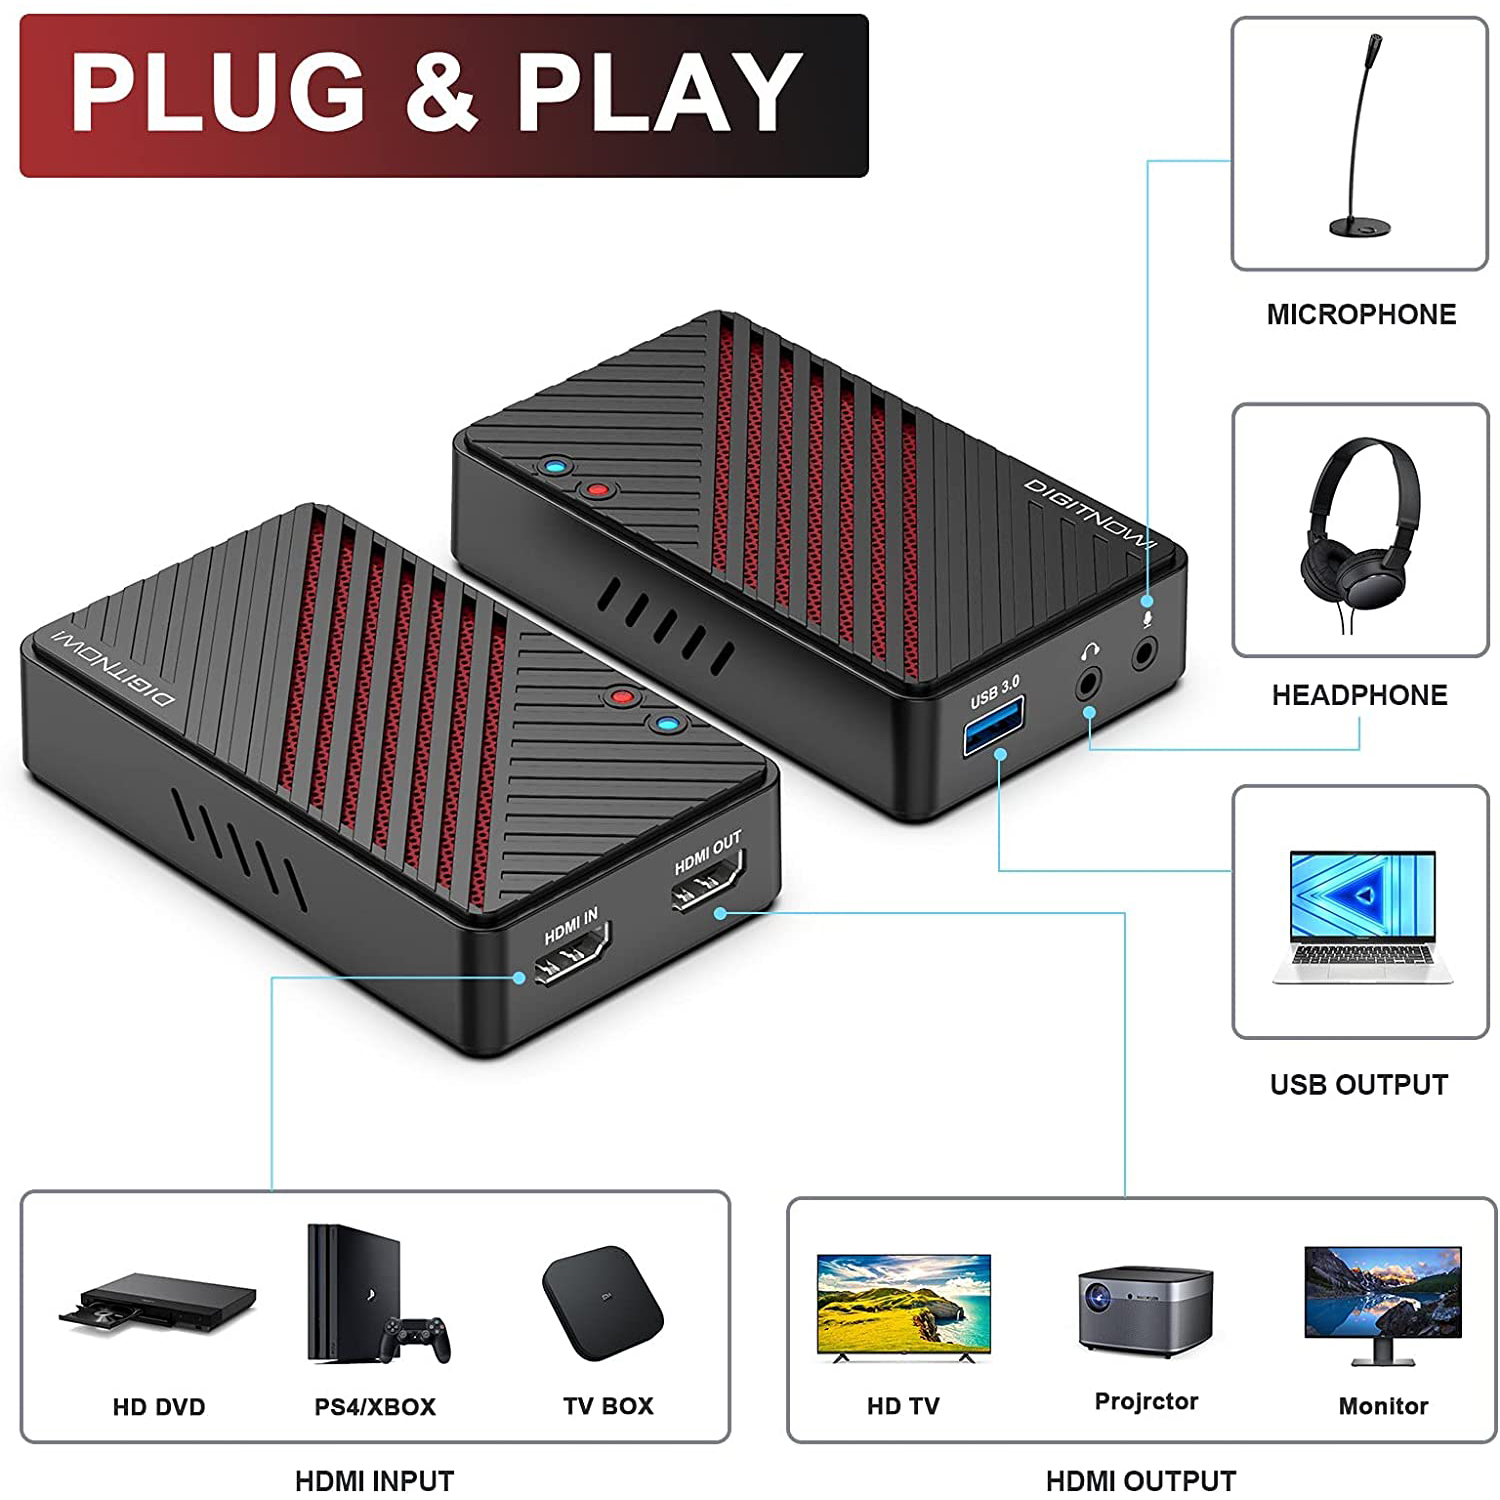 DIGITNOW 4K Video Capture Card, HDMI to USB3.0 Live Gamer Capture Card Full HD 1080P 60fps, Ultra-Low Latency for Streaming and Recording, Work with Nintendo Switch, PS5, PS4, Xbox One, PC